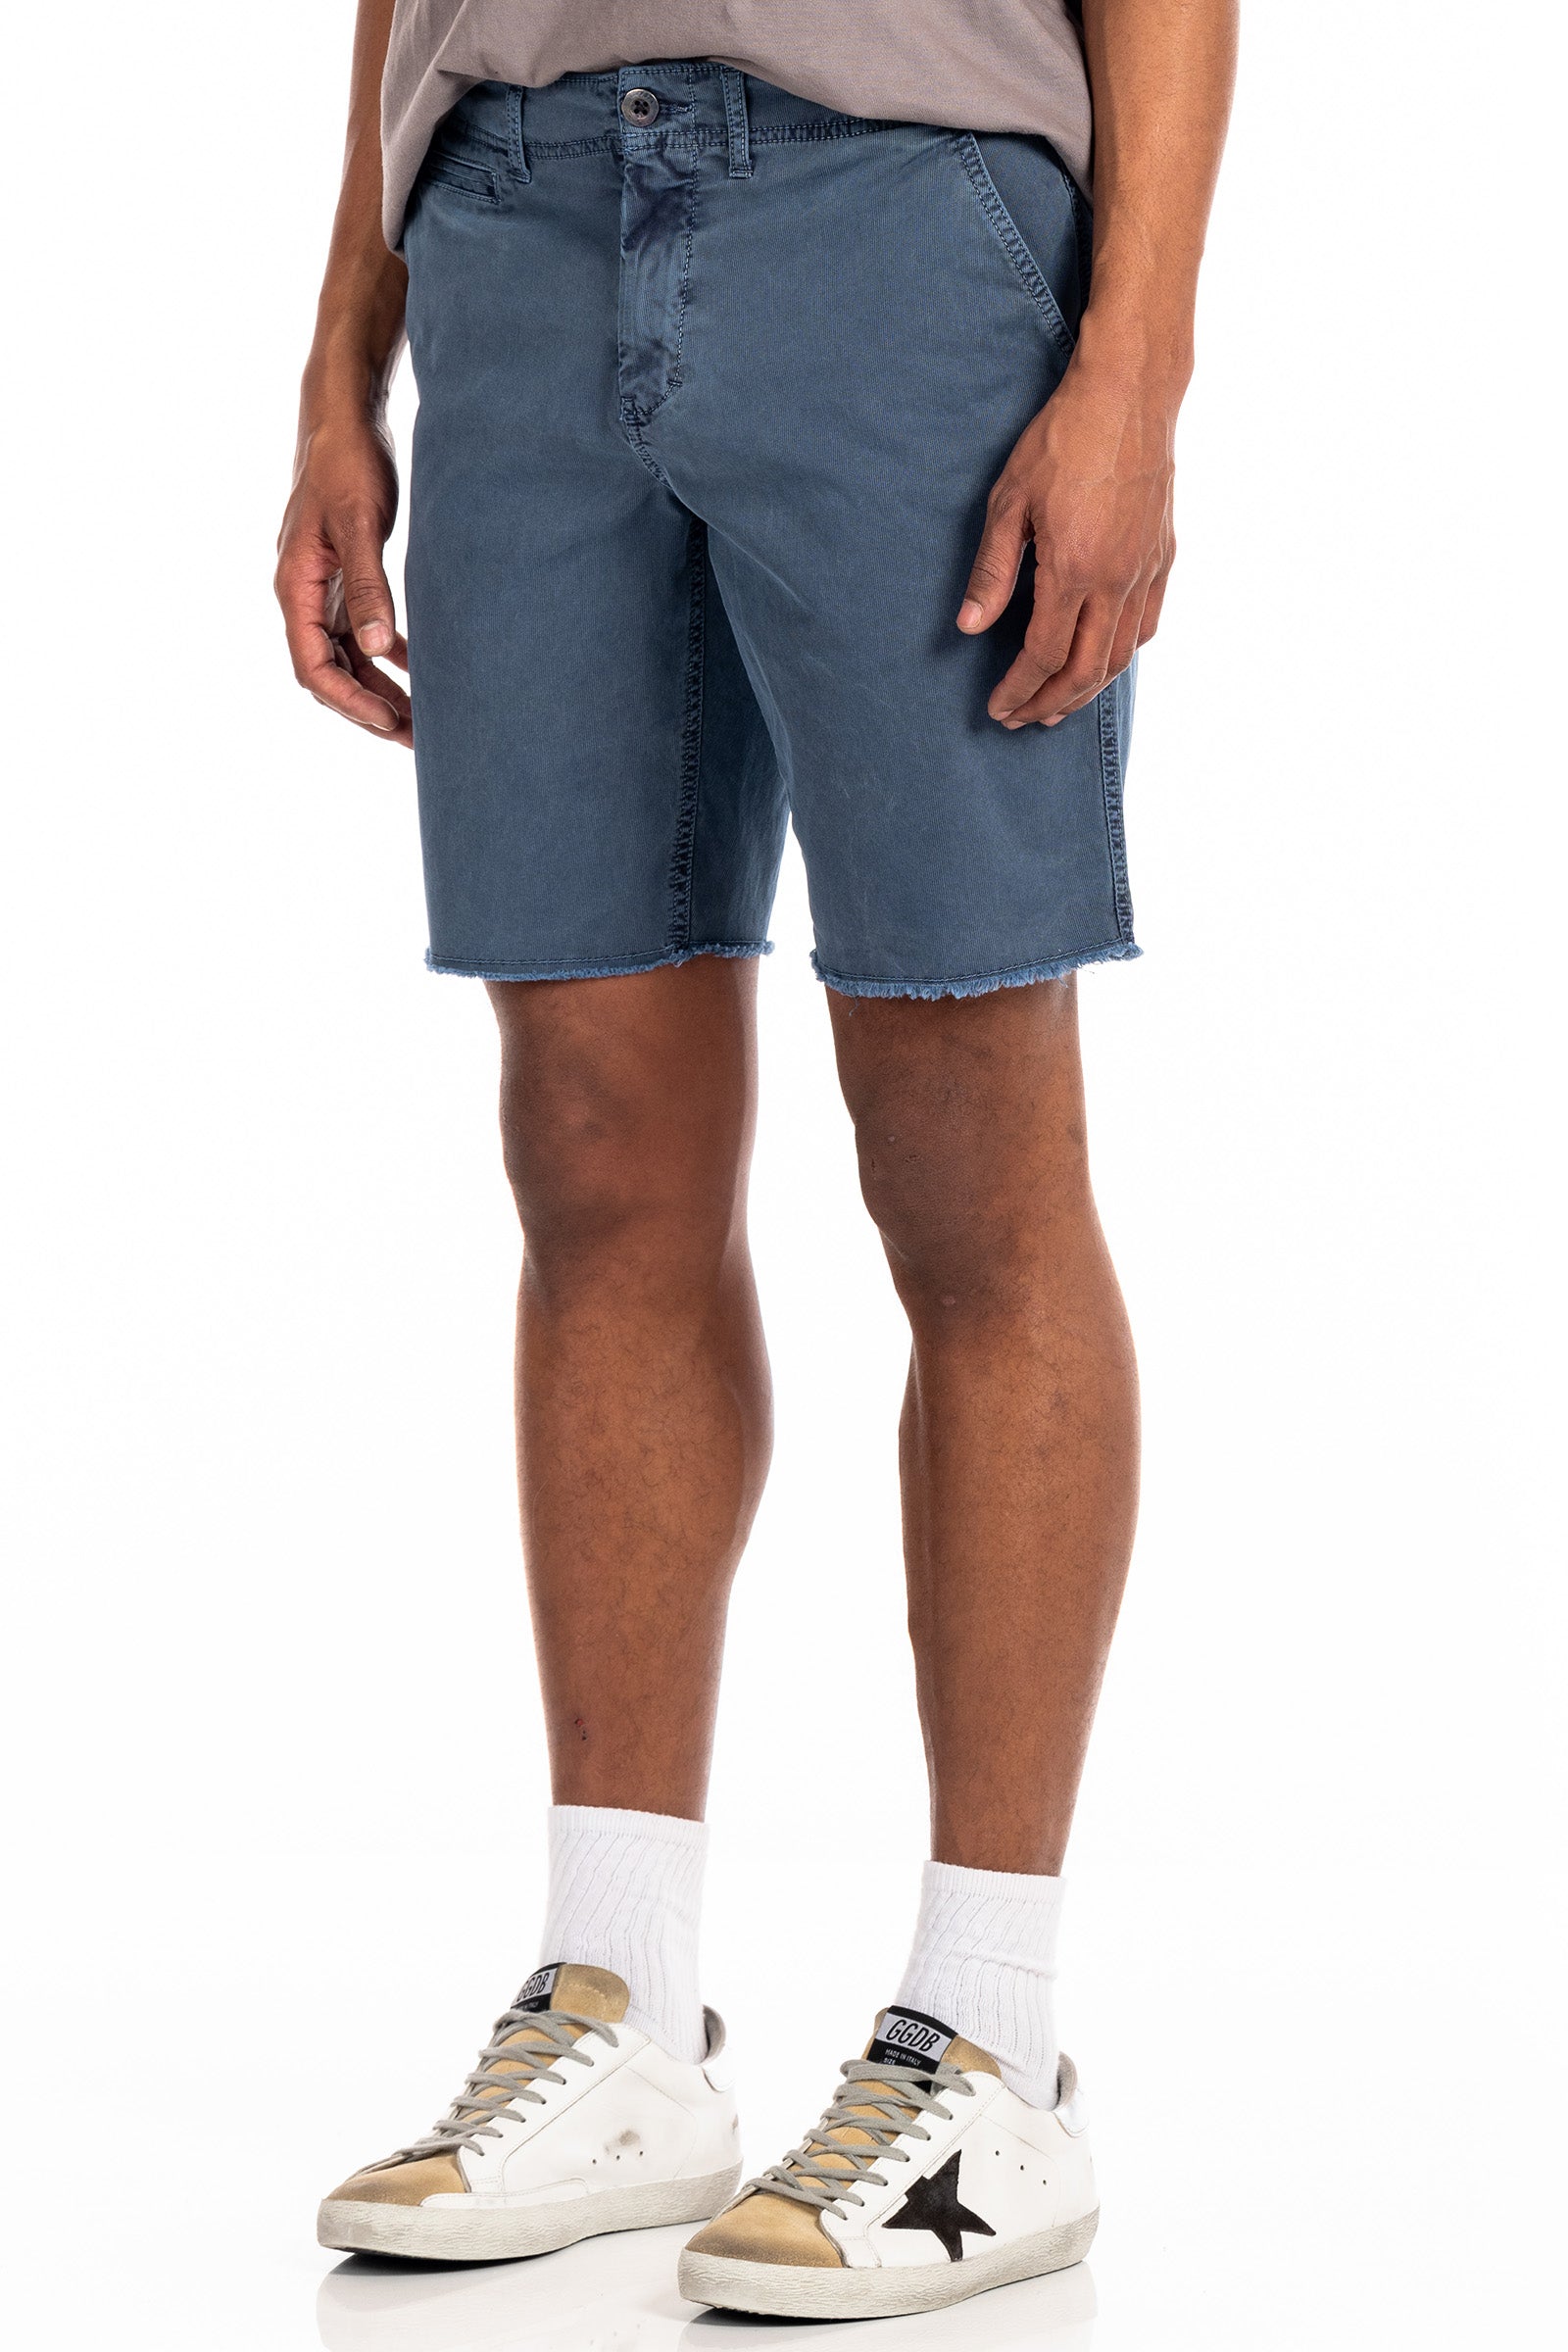 Original Paperbacks Brentwood Chino Short in Slate on Model Cropped Side View